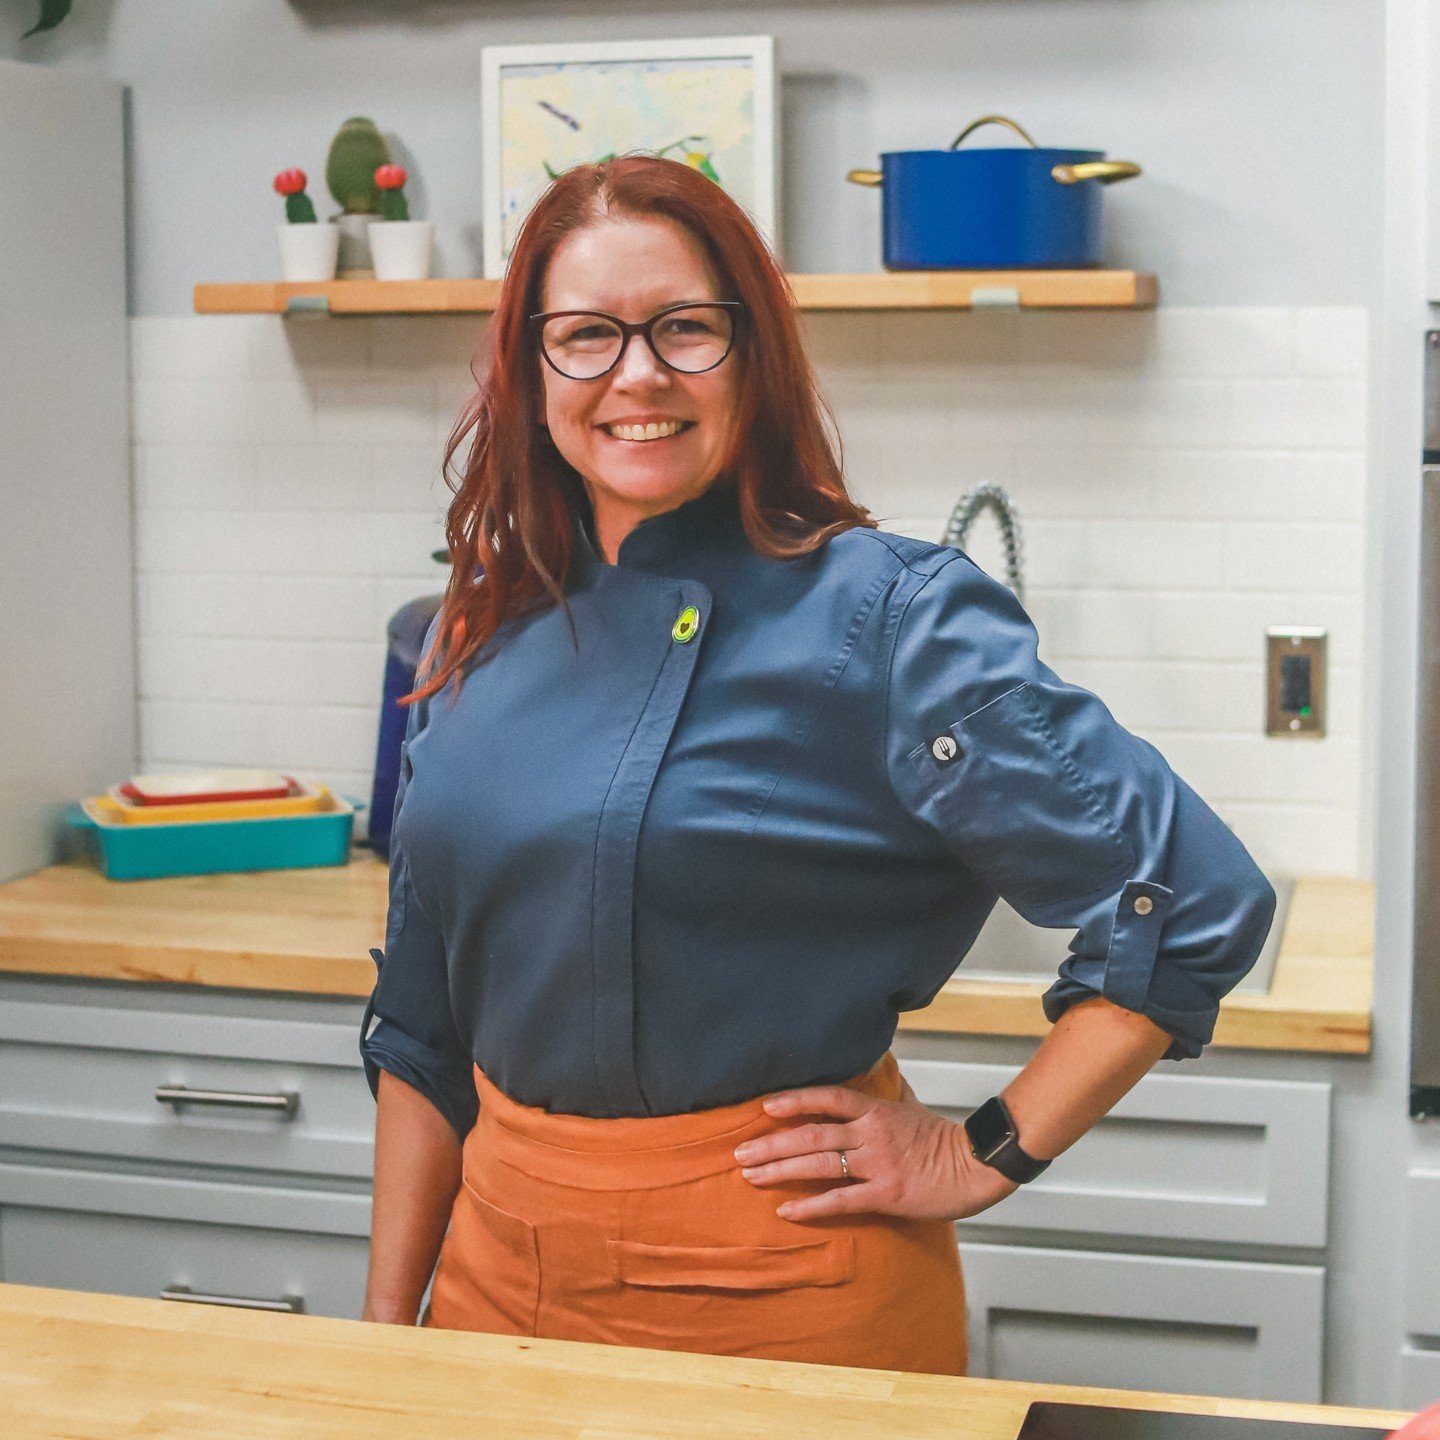 🥳🎉🎊 HAPPY HAPPY BIRTHDAY to our resident Queen of Pasta 🍝, Princess of Paella🥘, Matriarch of Mother Sauces 🥣, Empress of Empanadas 🥟, and all around BOSS of the kitchen👩&zwj;🍳, @chefsandysauter... If you've ever taken a class with Chef Sandy